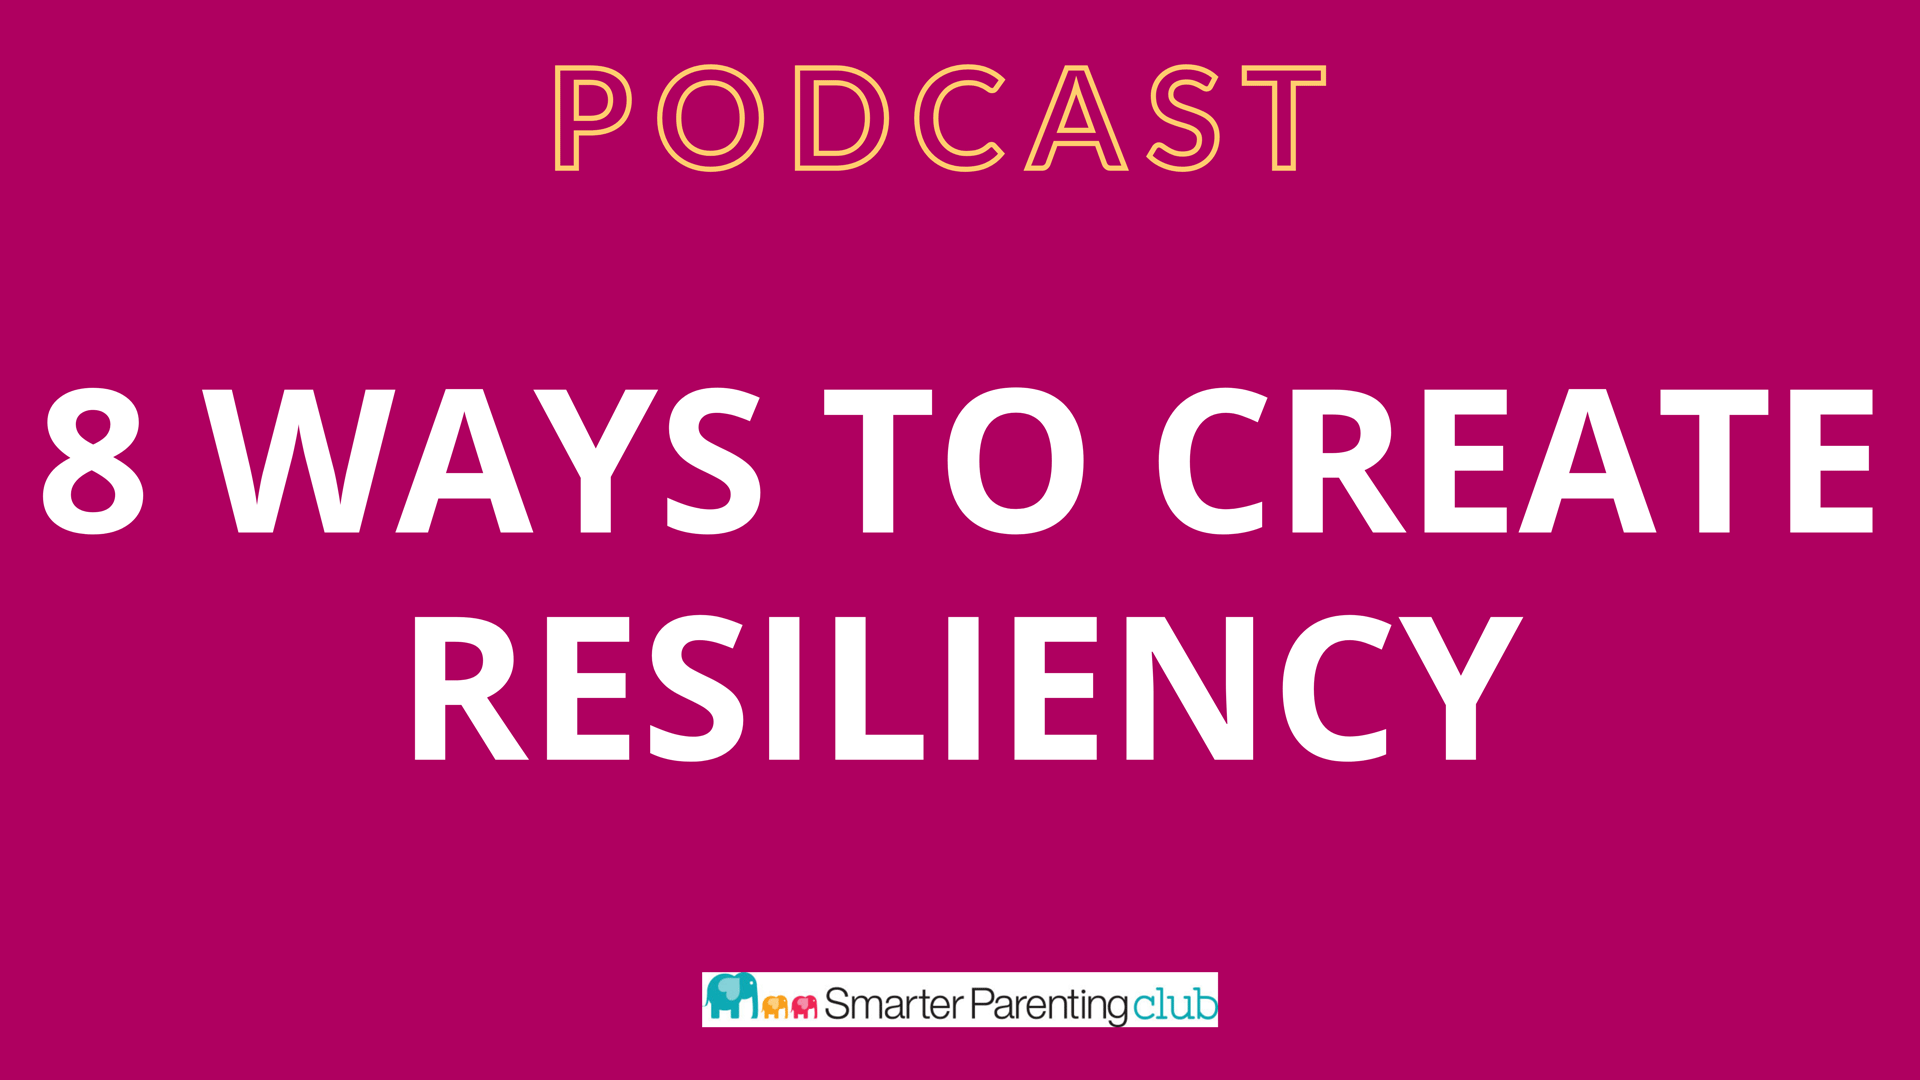 Eight ways to create resiliency